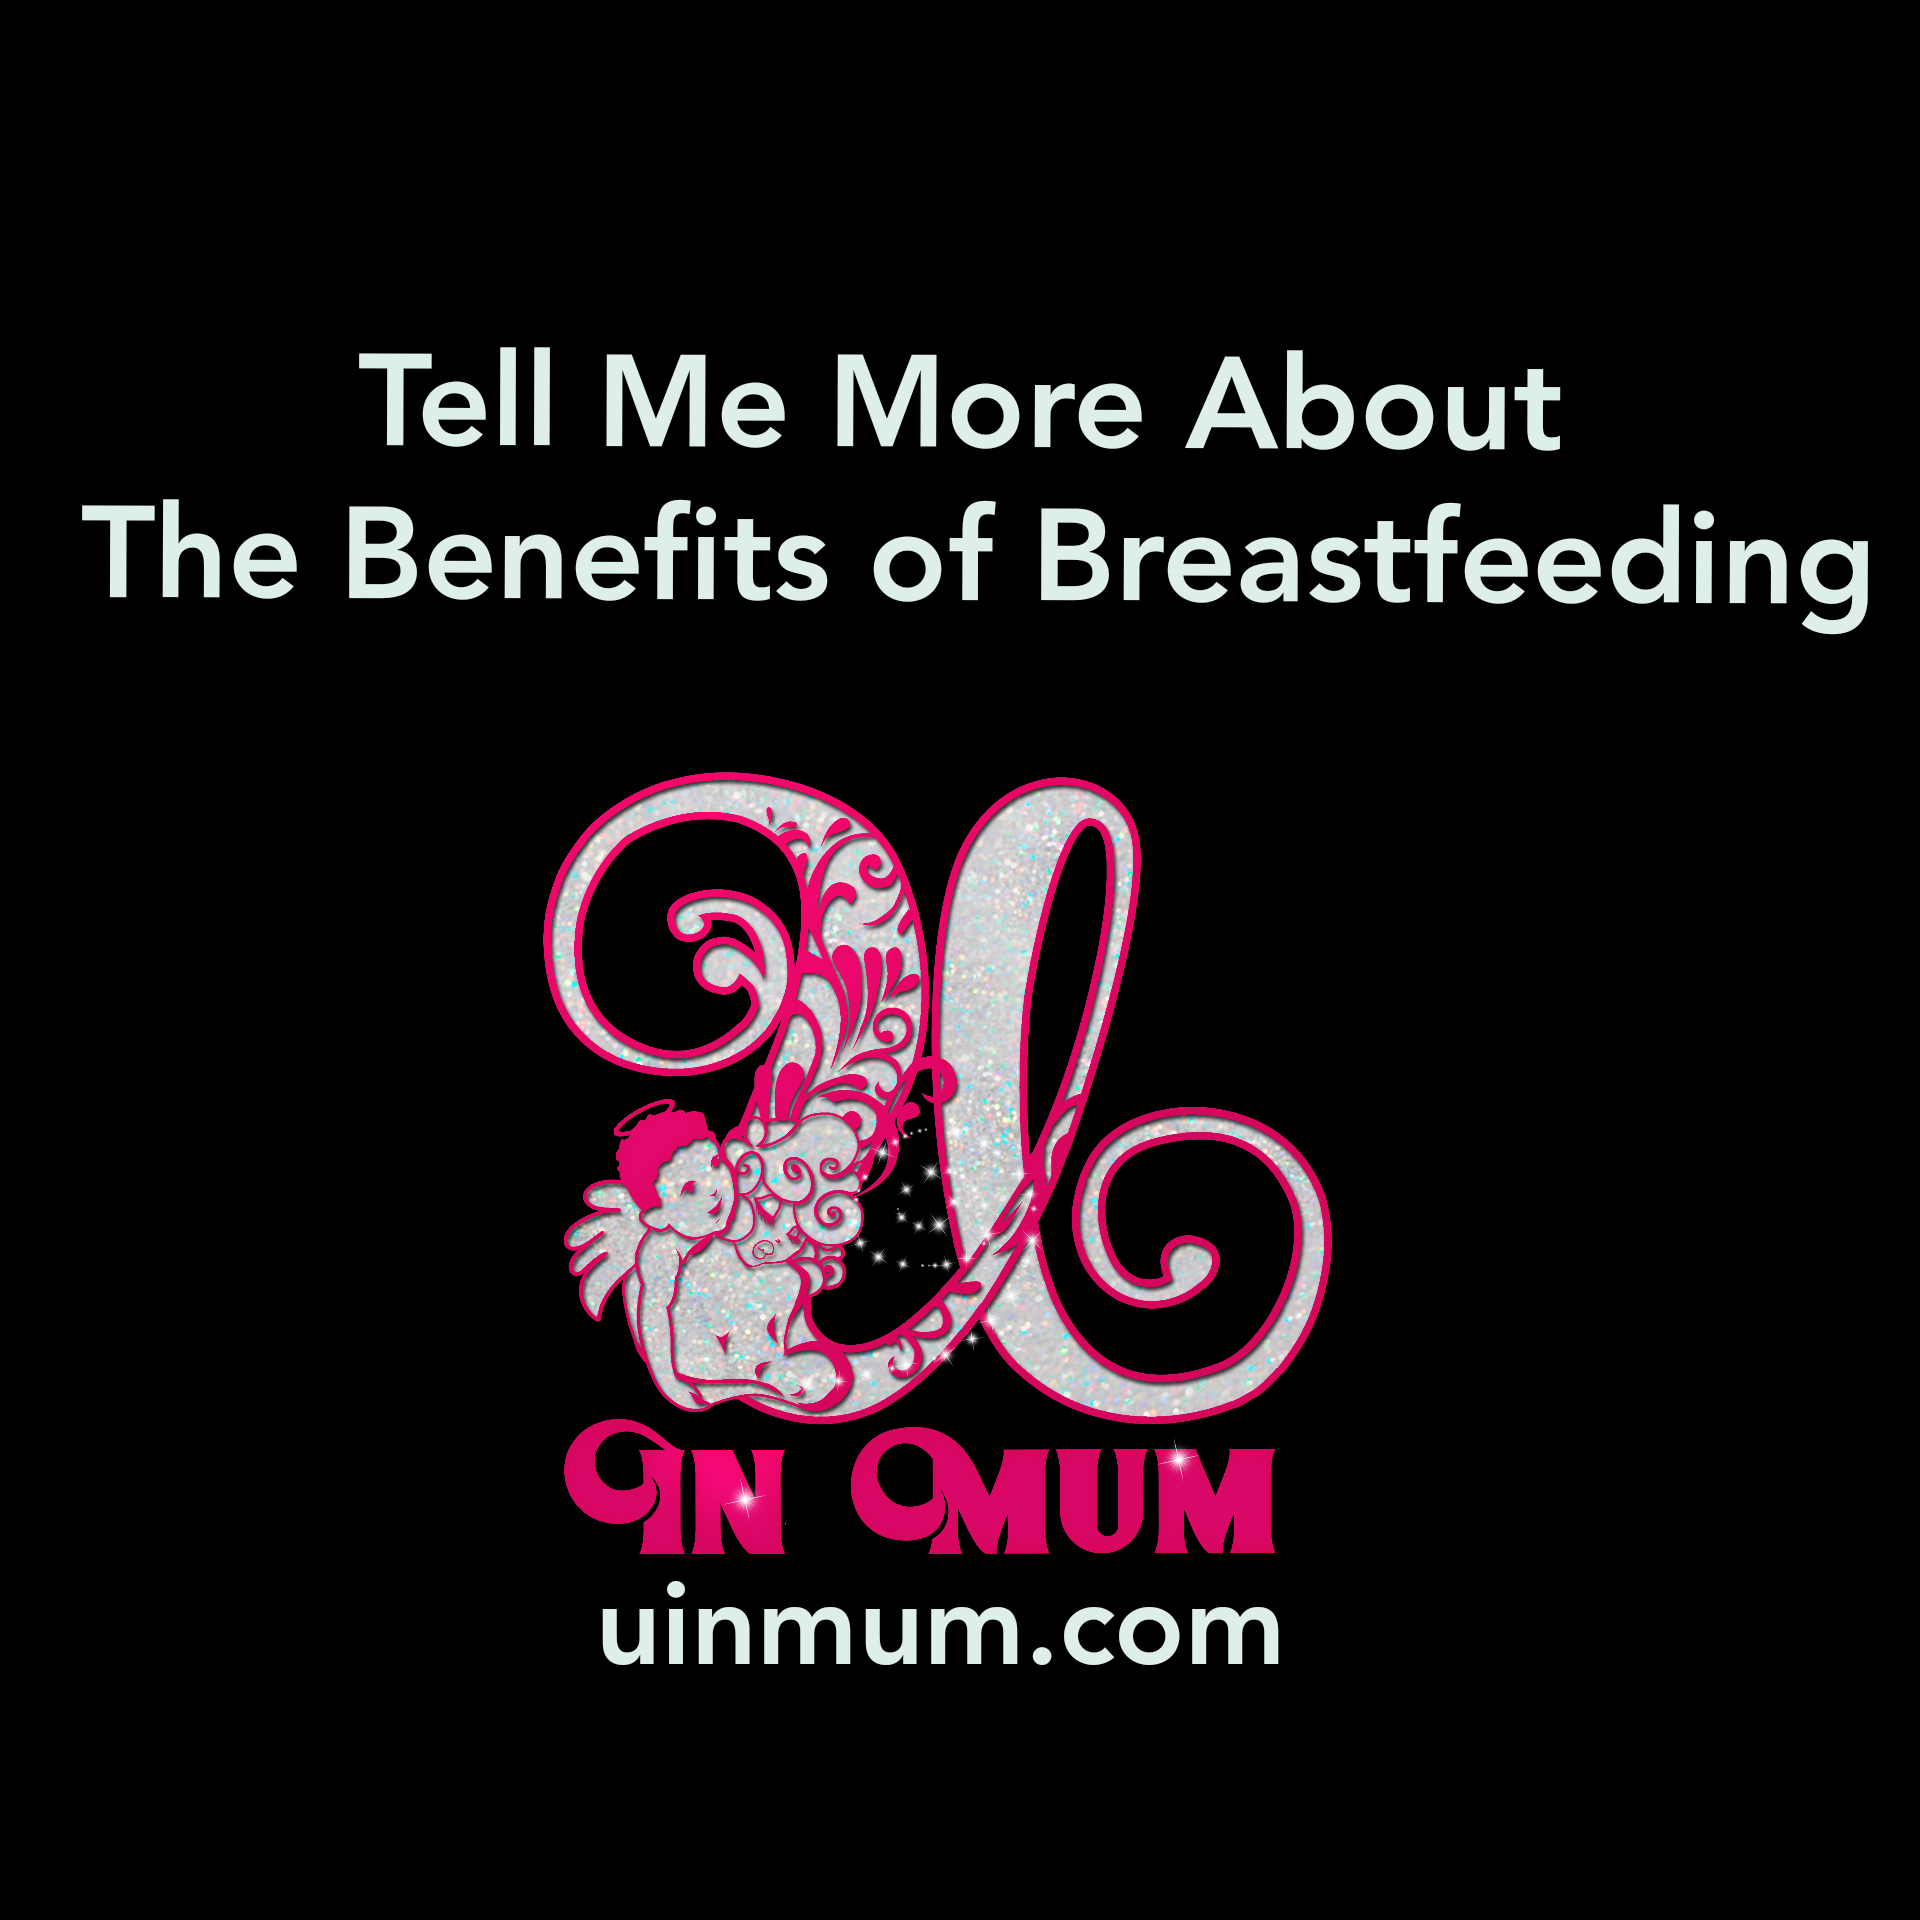 Tell Me More About The Benefits of Breastfeeding